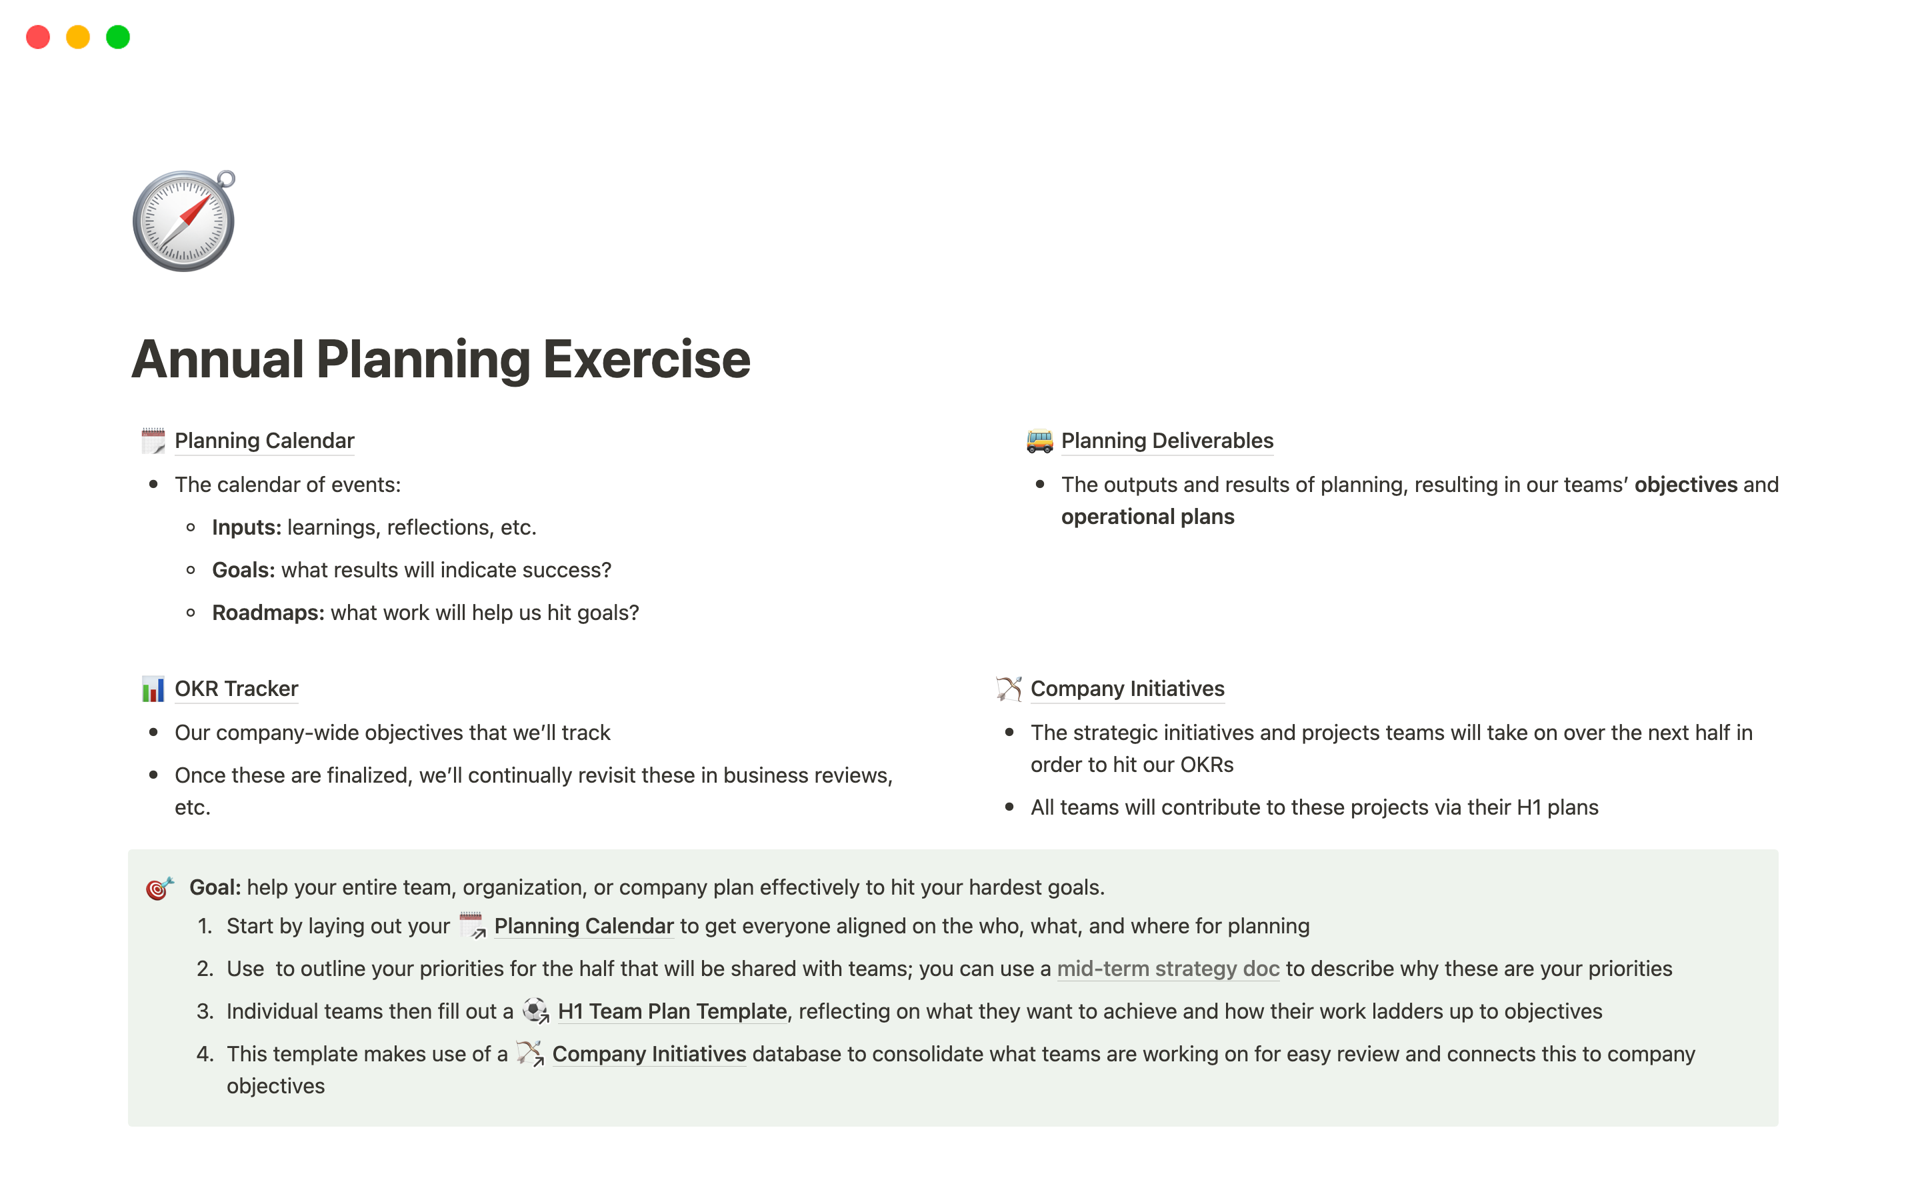 An extensive document that helps you execute and organize the outcomes of your annual planning.